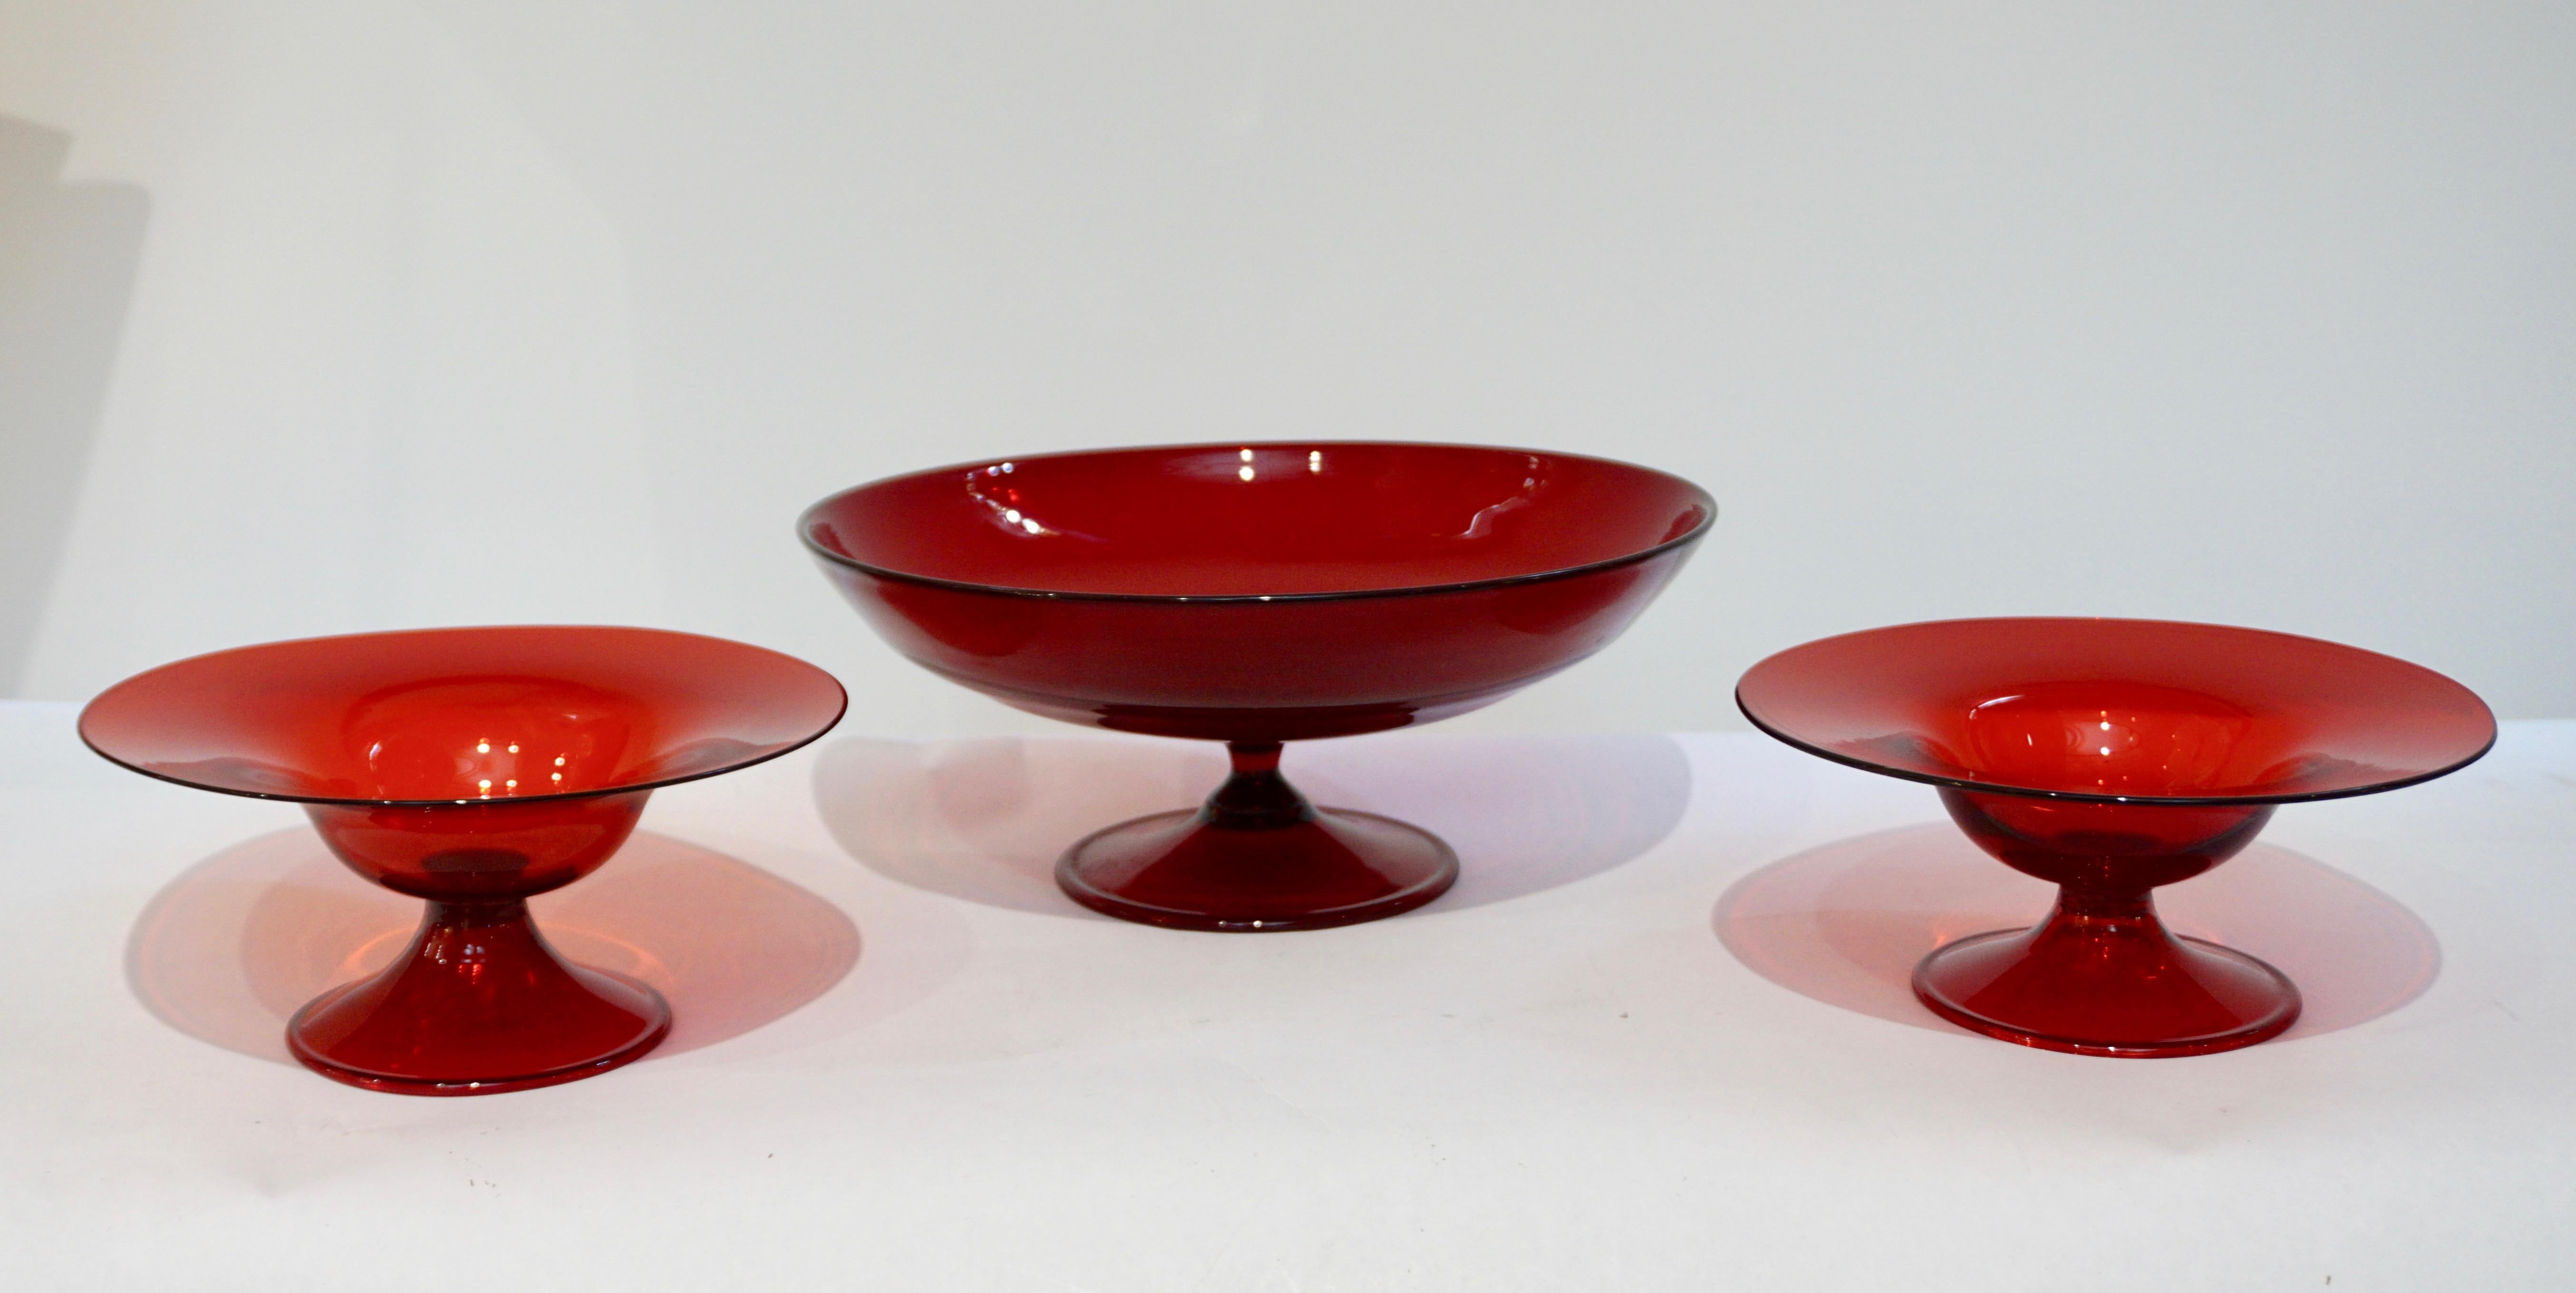 Hand-Crafted Salviati, 1940s Italian Antique Ruby Red Murano Art Glass Compote Dish or Bowl